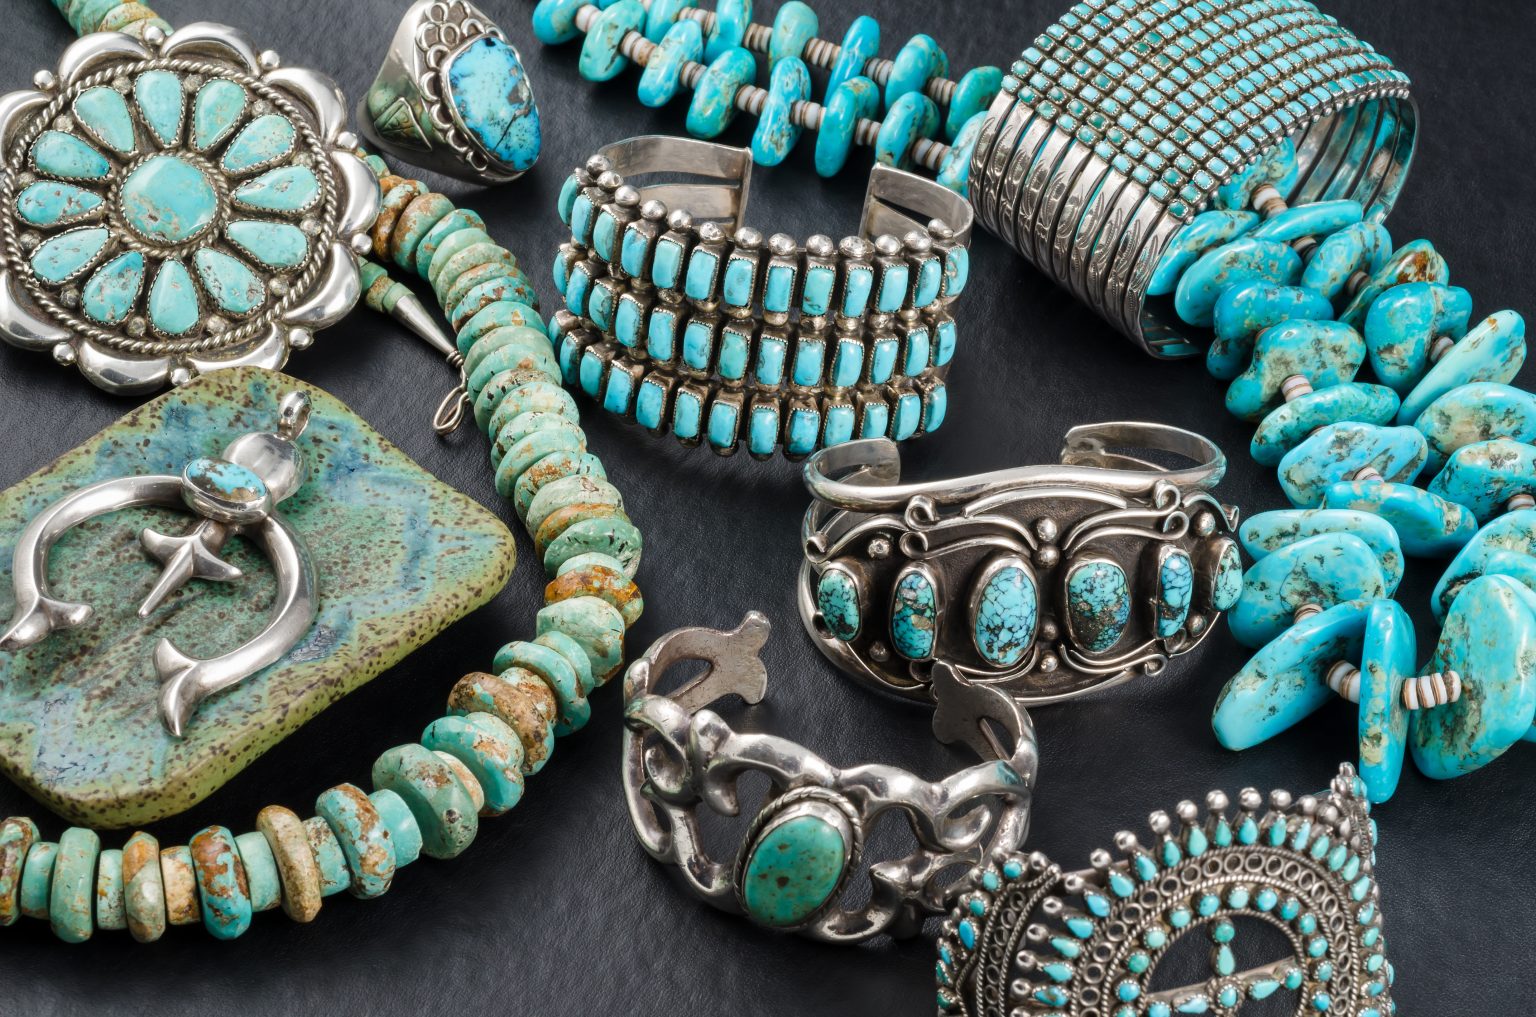 How To Tell If Turquoise Is Real Or Fake Tips On Spotting Fake